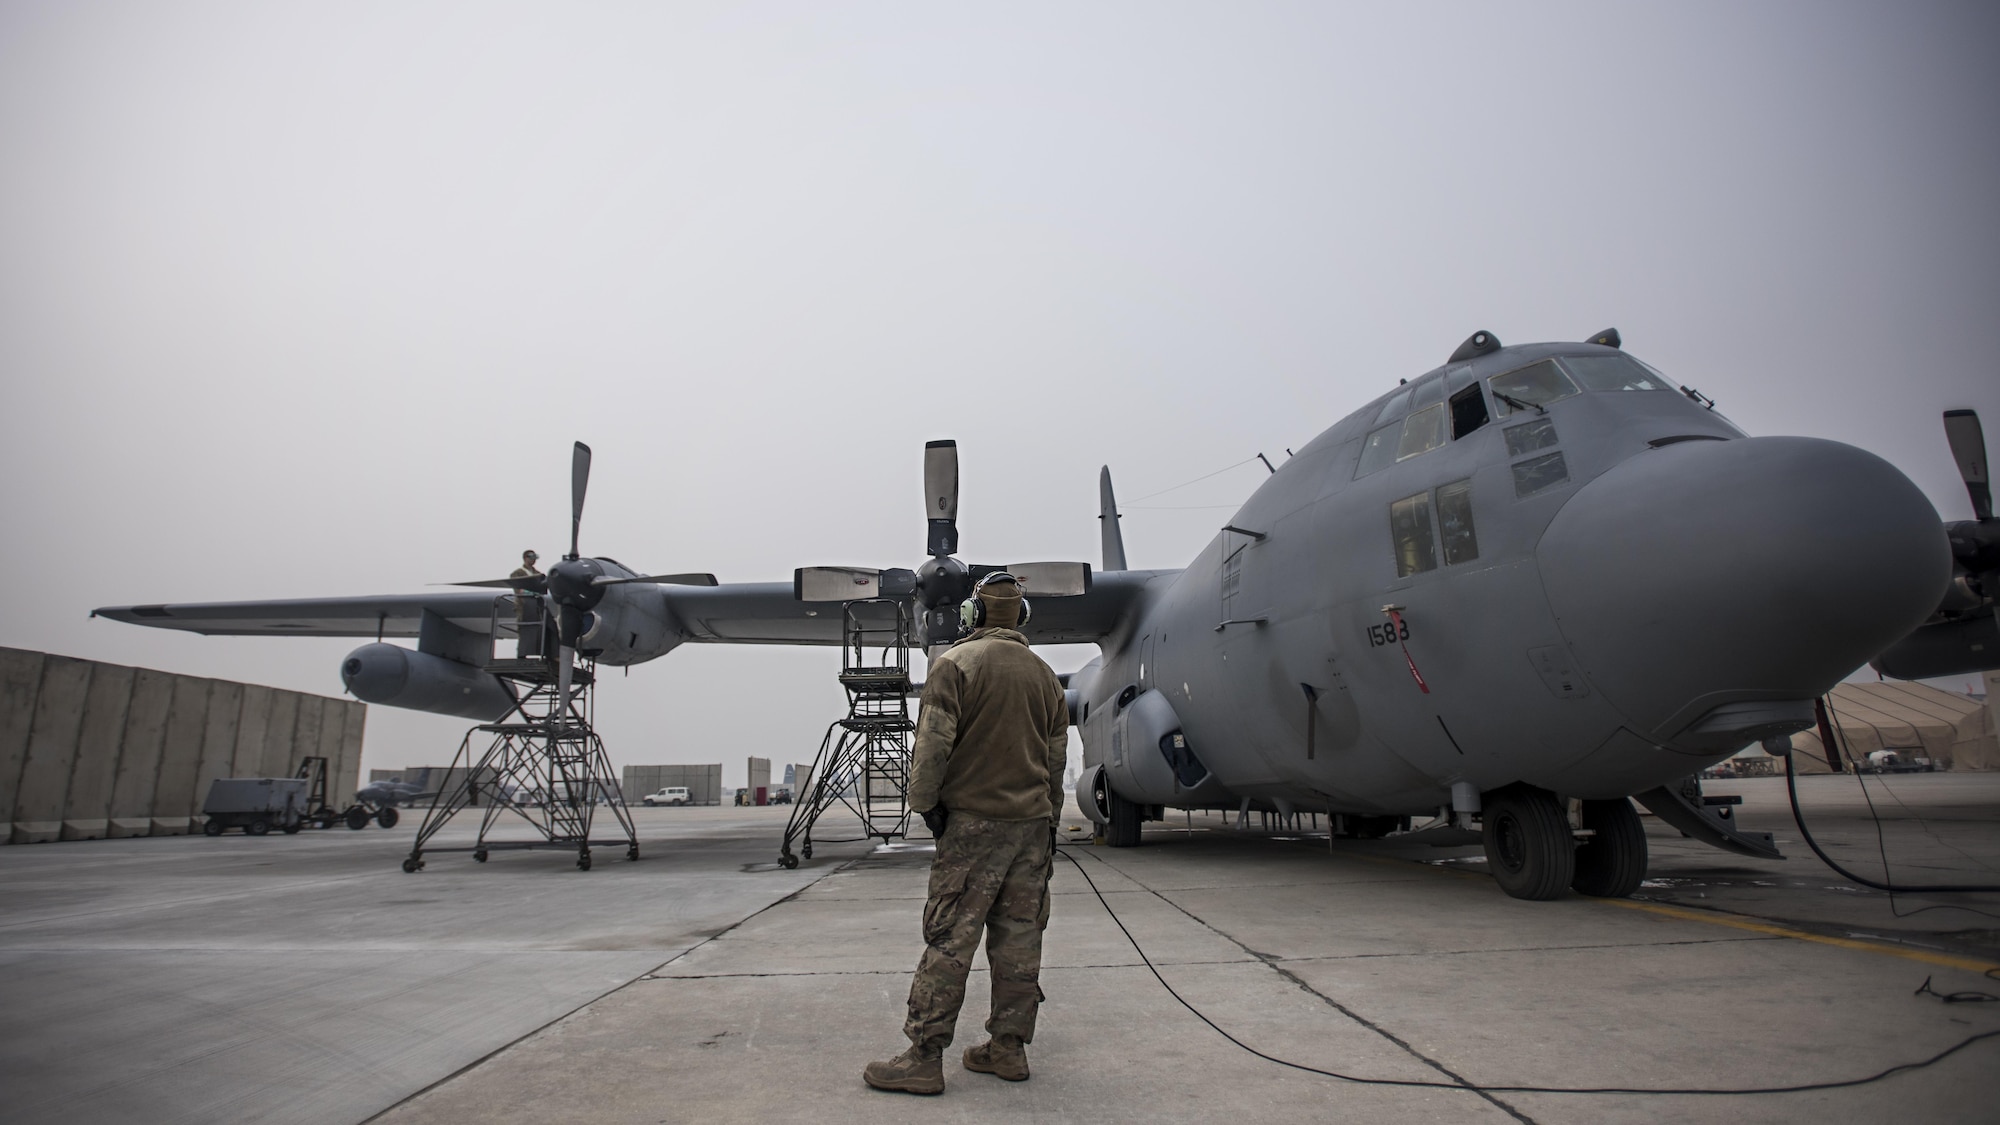 Staff Sgt. Kyle Poston, 455th Expeditionary Aircraft Maintenance Squadron crew chief, oversees engine maintenance on an EC-130 Compass Call Jan. 18, 2017 at Bagram Airfield, Afghanistan. To date, 41st EECS crews have flown over 39,000 hours during 6,800 combat sorties in support of Operation Enduring Freedom, and now the Resolute Support Mission. (U.S. Air Force photo by Staff Sgt. Katherine Spessa)